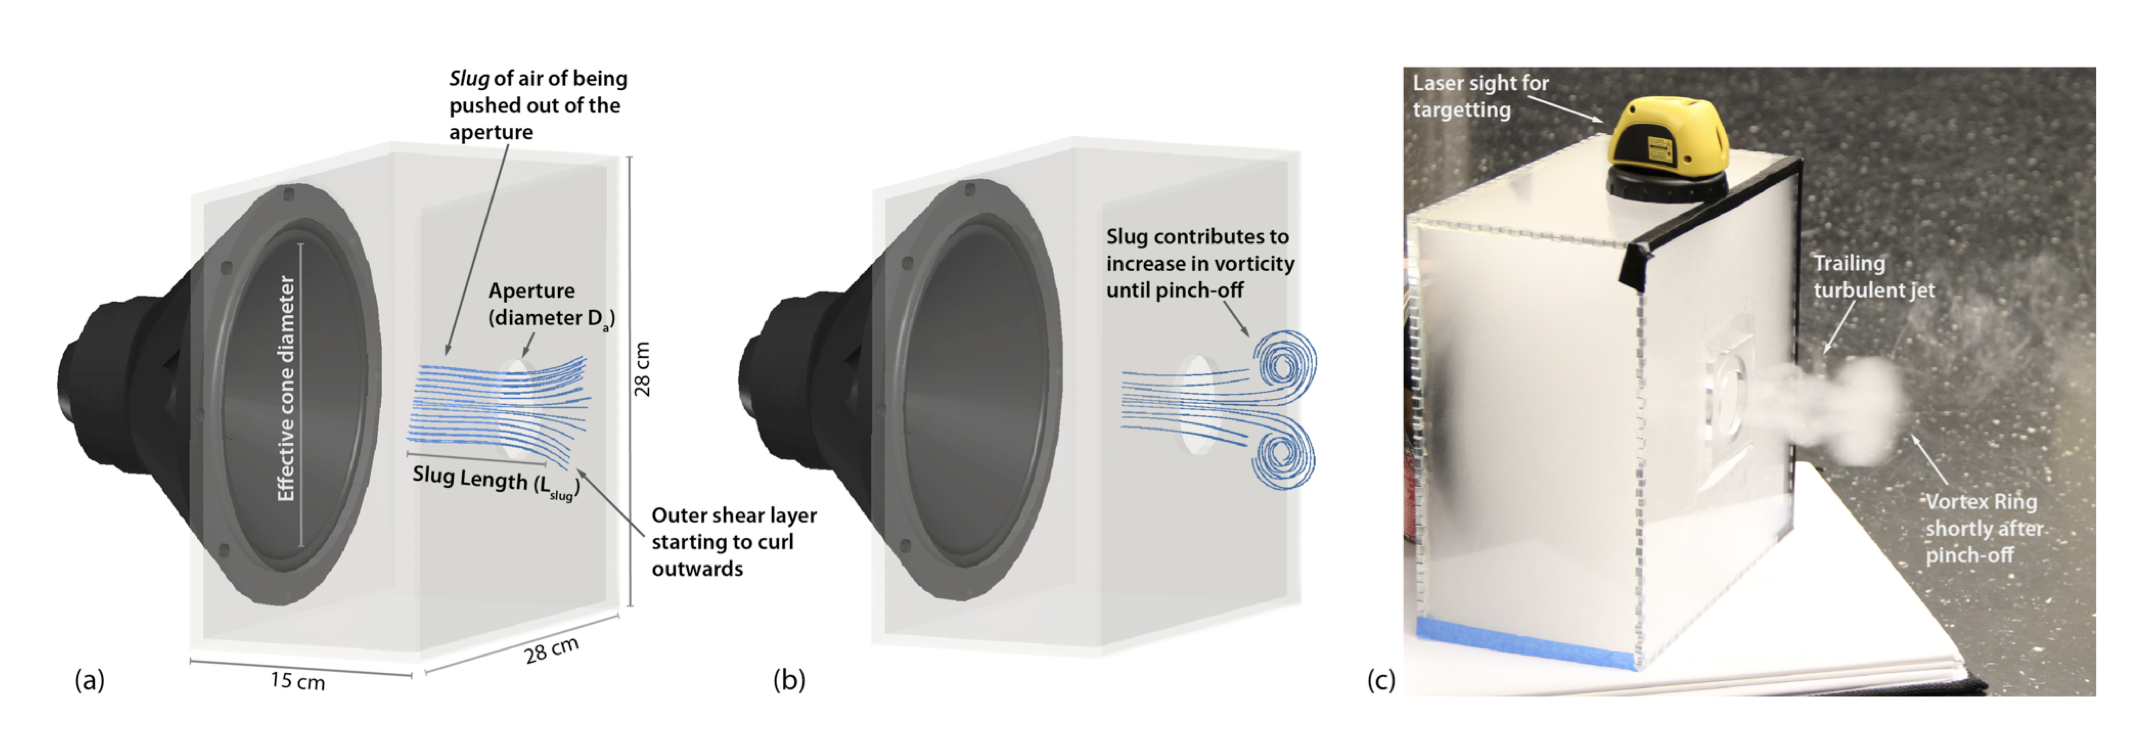 (a) As the air spot is pushed out of the aperture, the boundary layer starts to curl outwards as it exits, (b) causing the vortex to detach and (c) the AirWave prototype to be filled with mist to visualise a vortex ring just after exit.